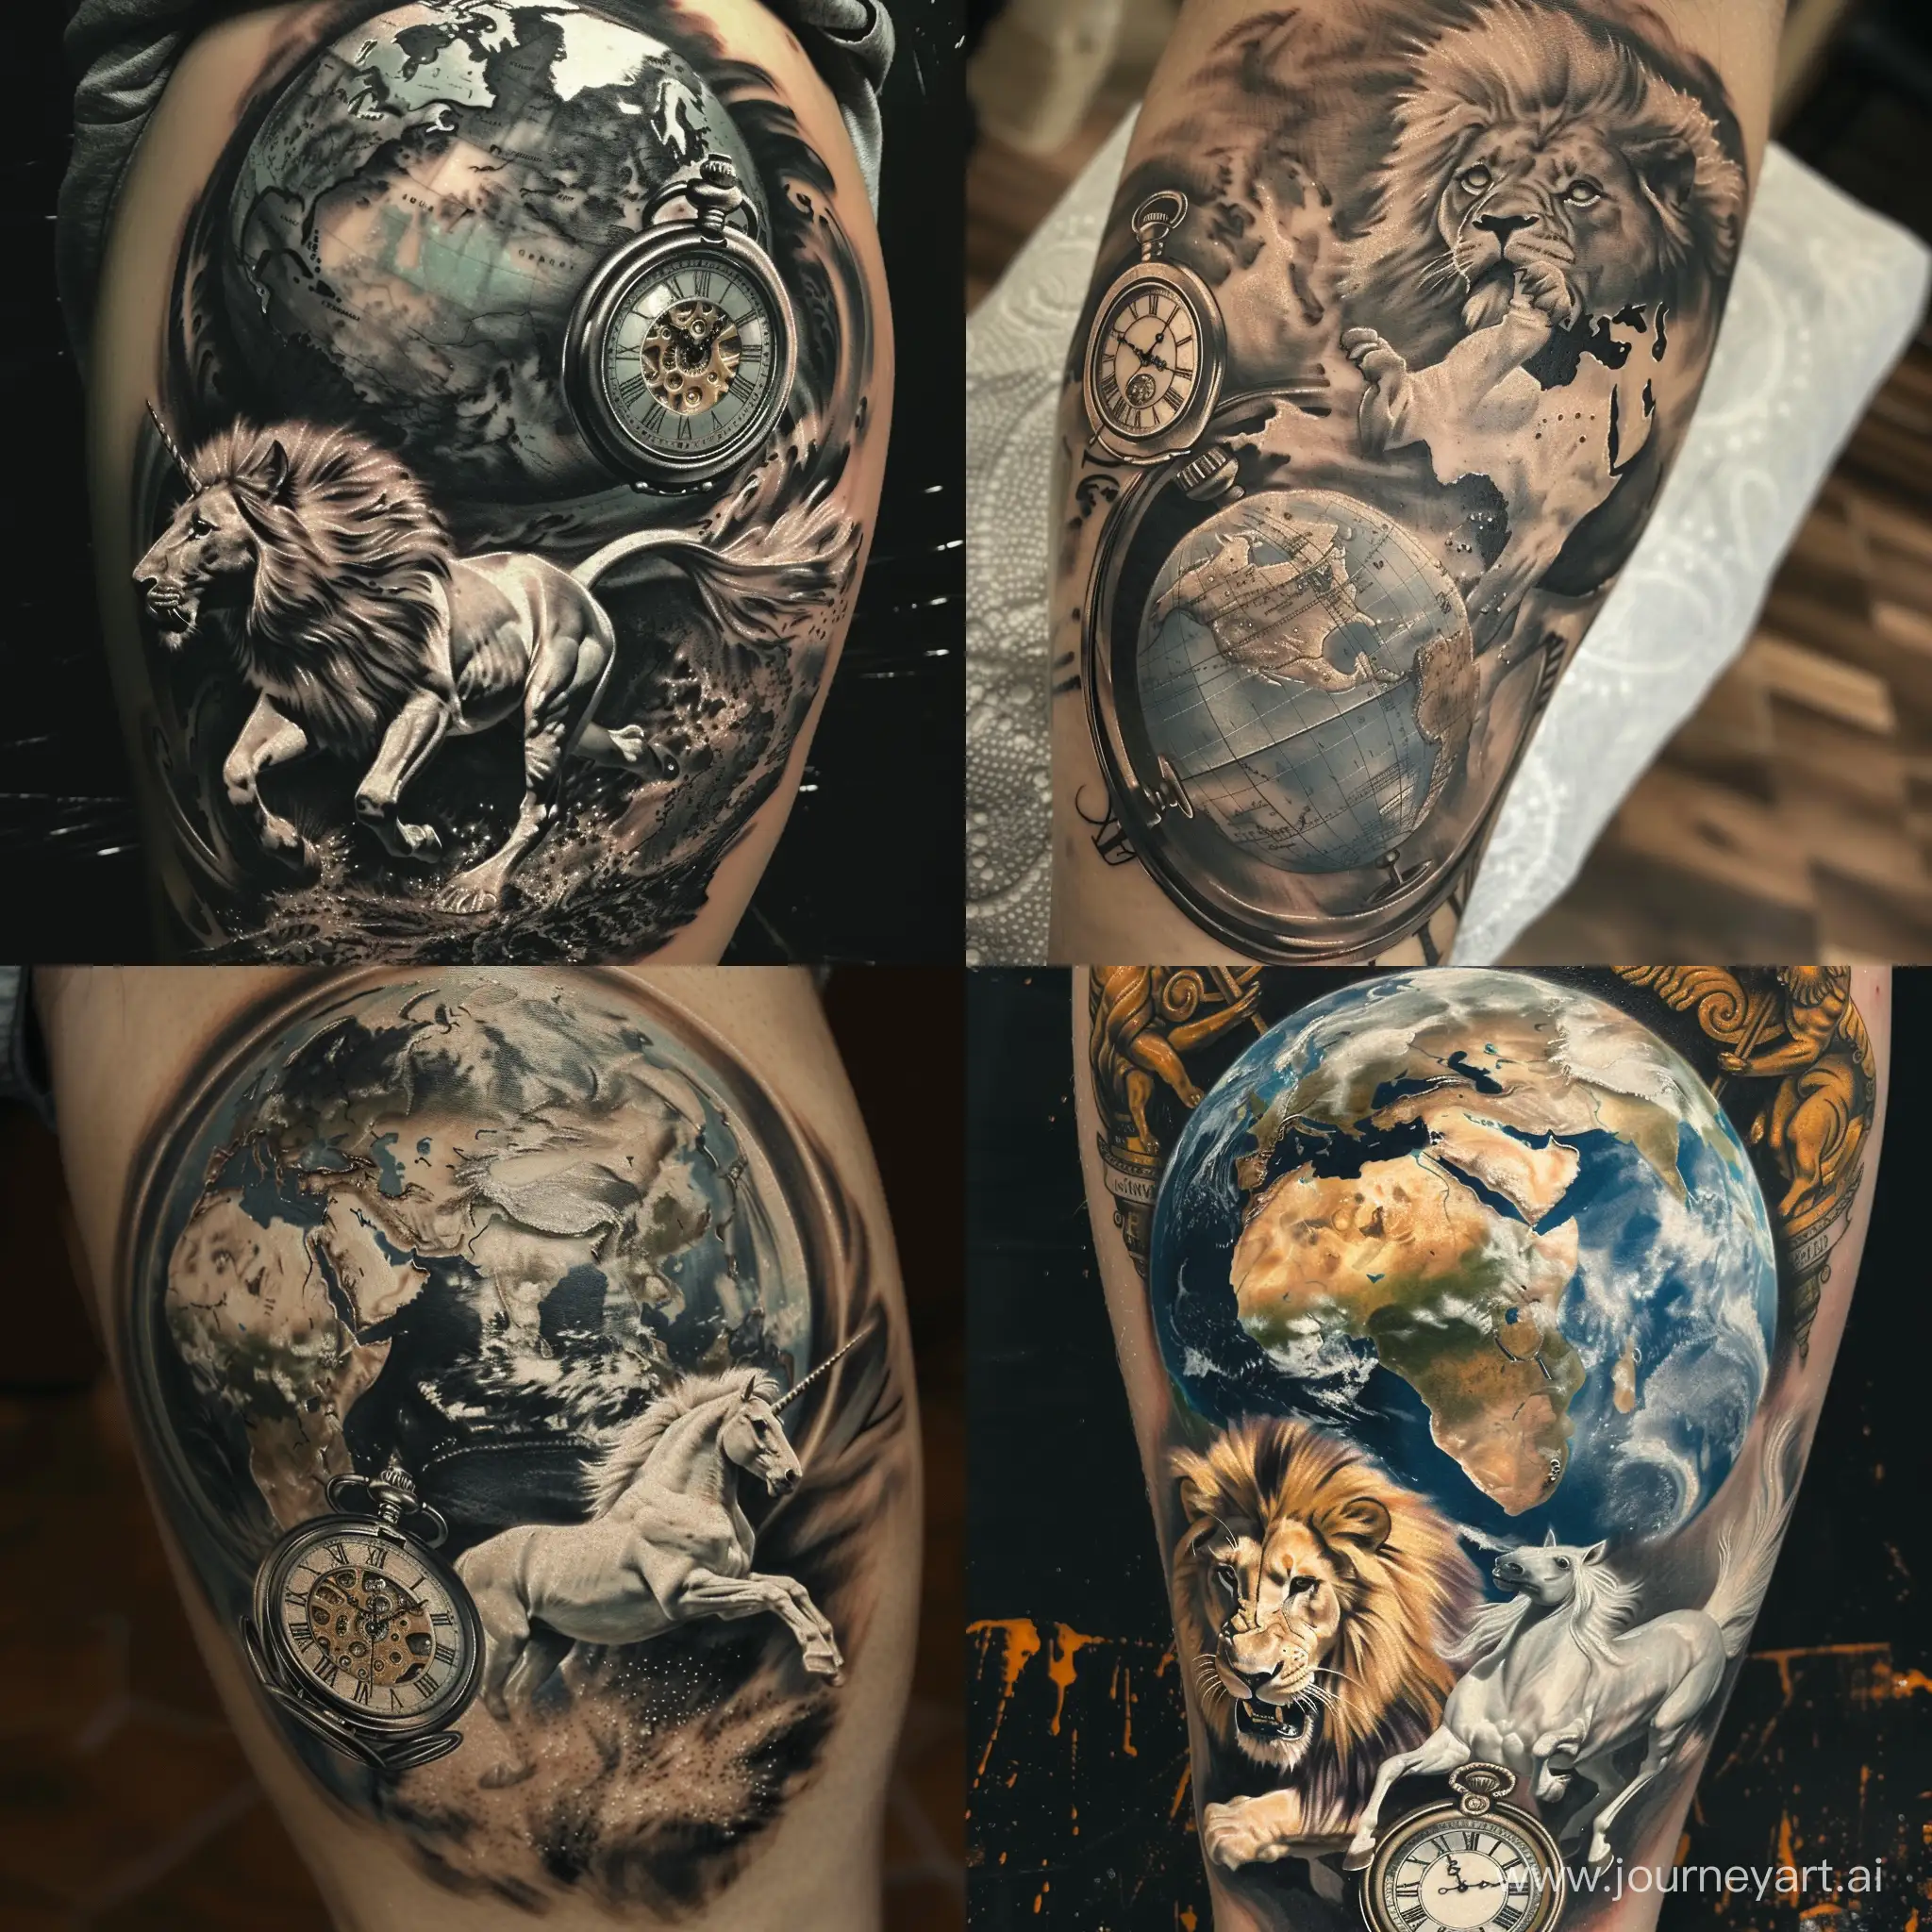 Realism-Tattoo-of-Lion-and-White-Horse-with-Antique-Pocket-Watch-and-Globe